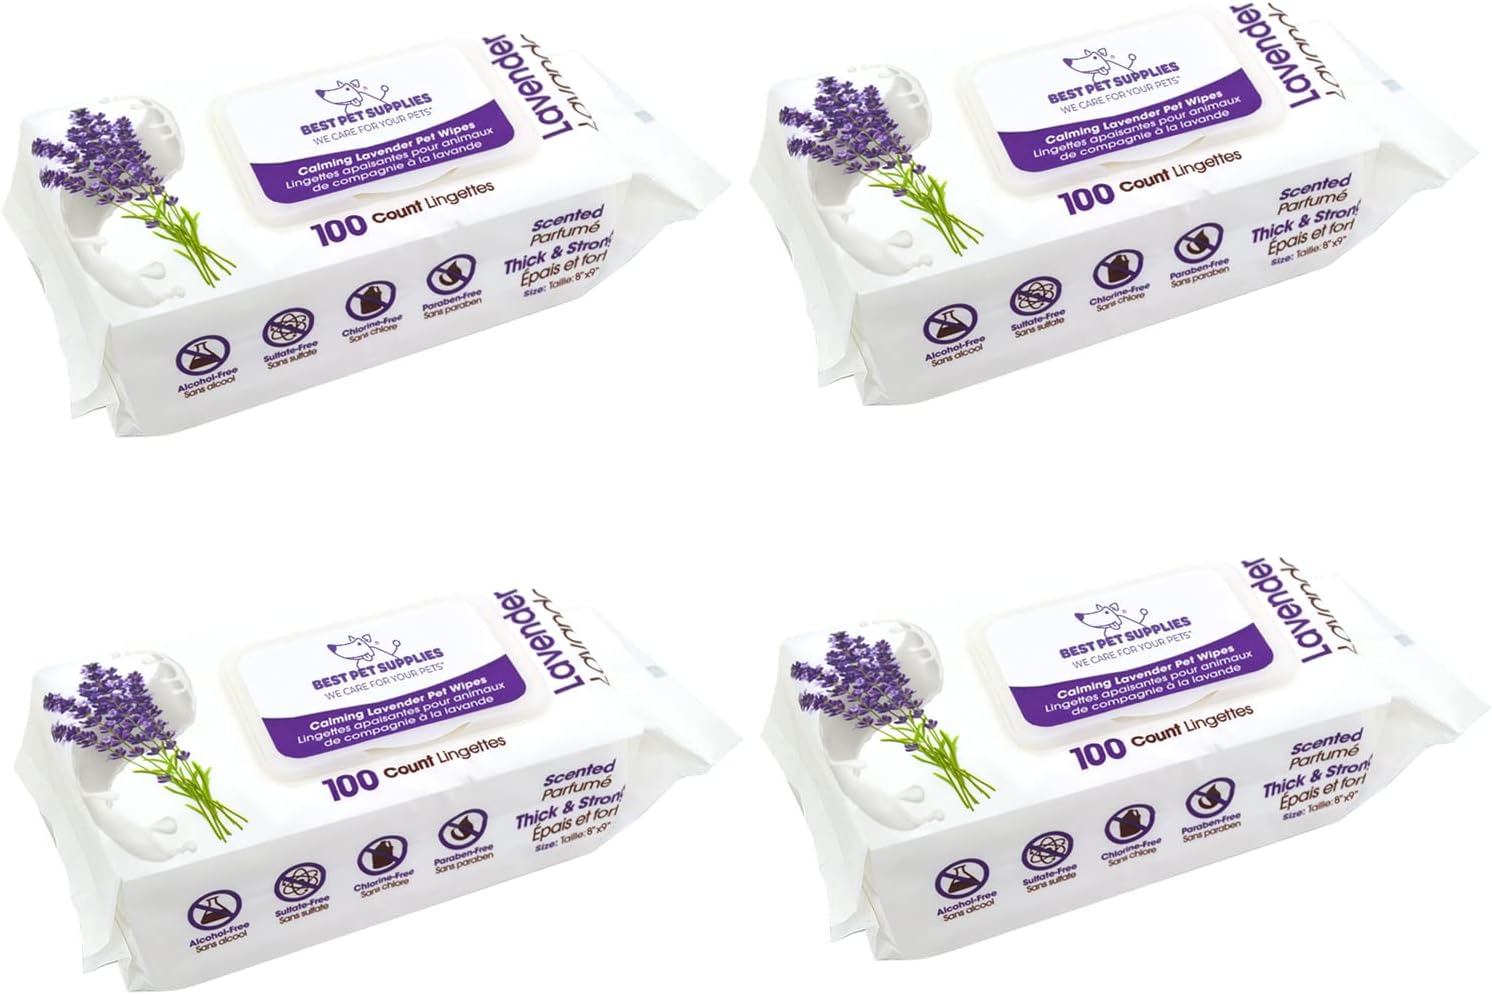 Best Pet Supplies 8" X 9" Pet Grooming Wipes - 100 Pack, Plant-Based Deodorizer, Calming Lavender Scent